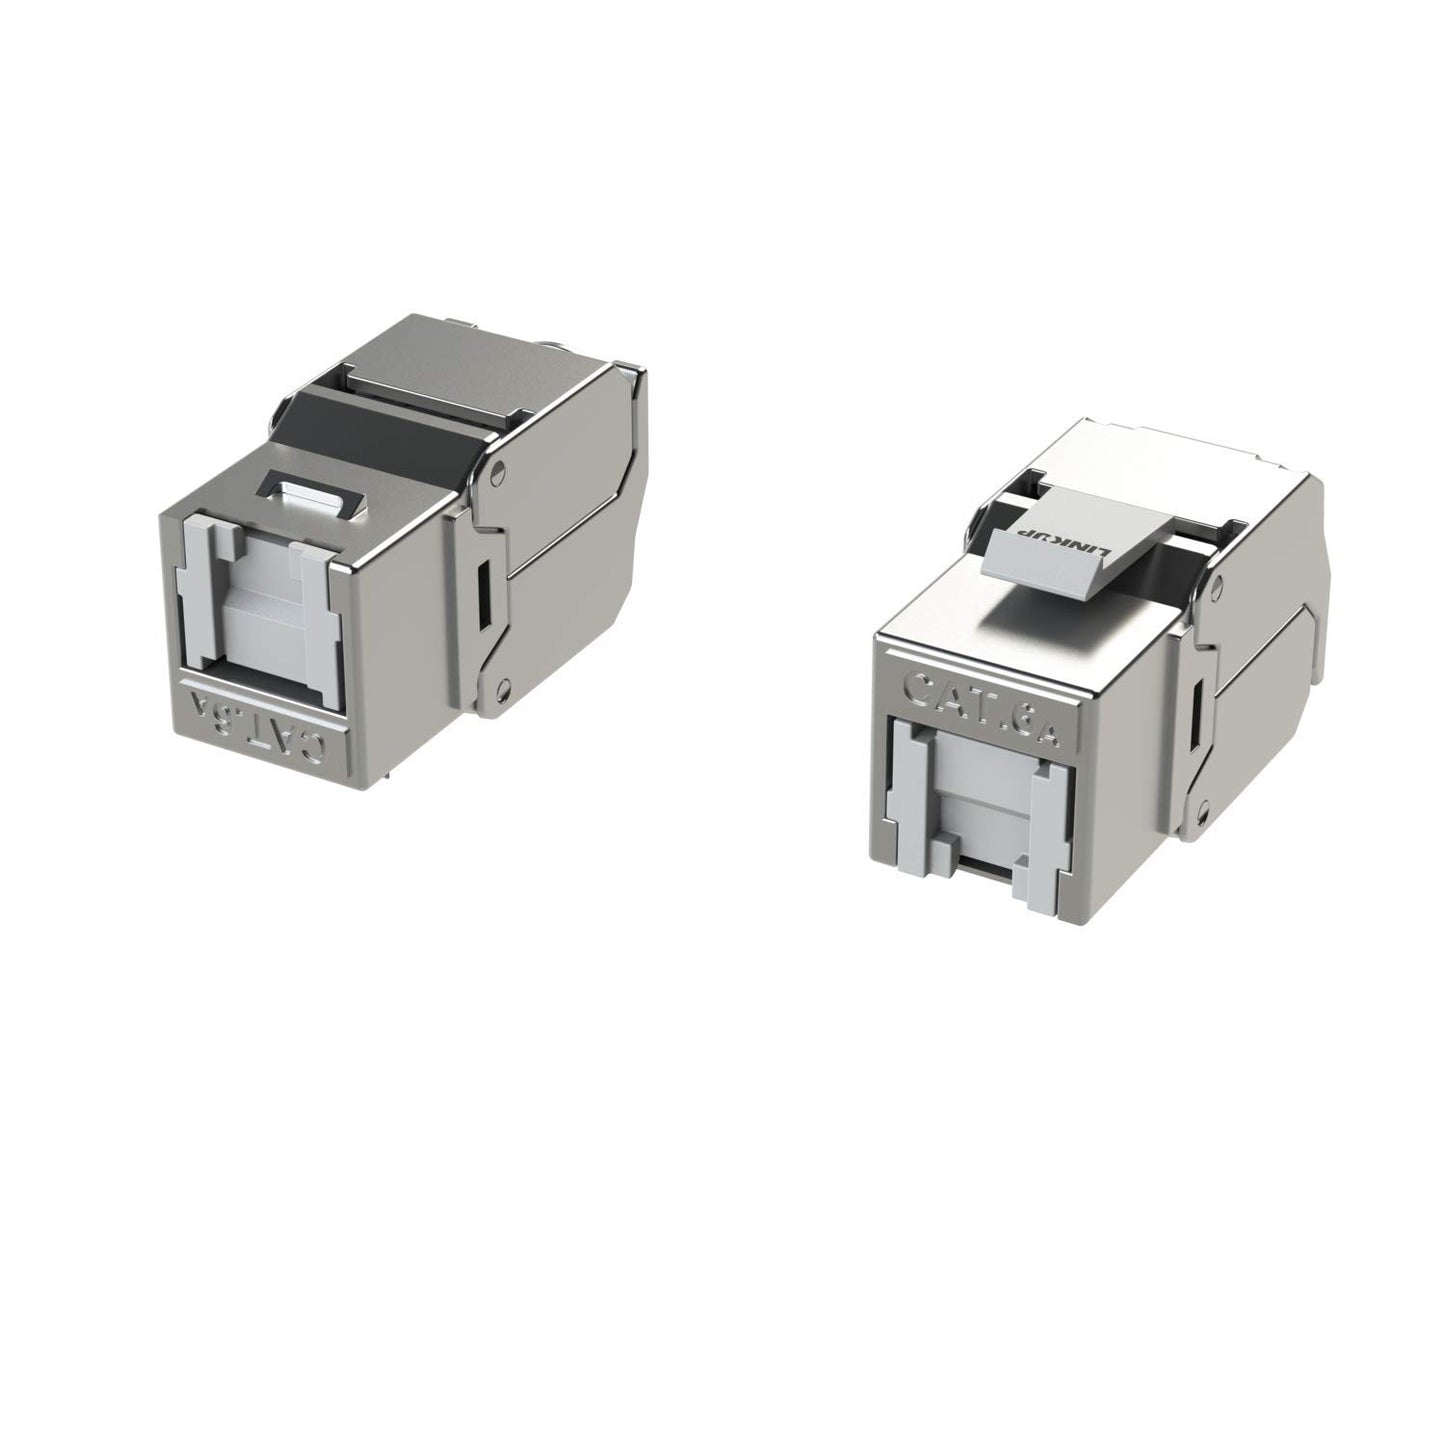 LINKUP - RJ45 Connectors Cat6A (2 Pack) Shielded Zinc-Alloy Housing Modular Termination Plug | 10G Easy Internet Tool Free Plugs | for Cat6A up to 22AWG Solid Bulk S/FTP Ethernet Cable [White]